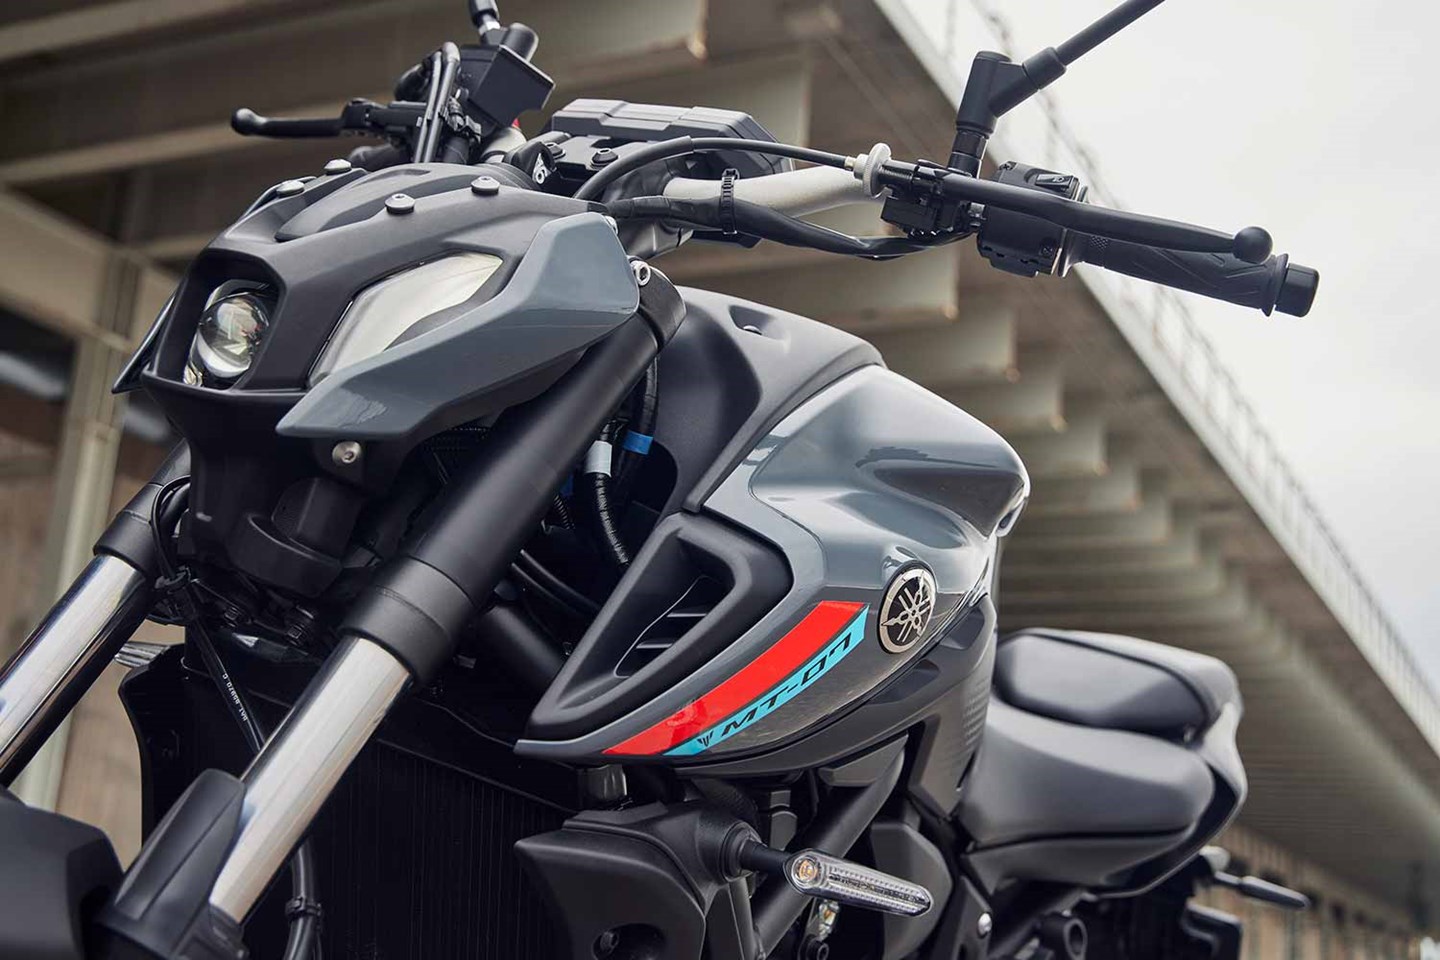 2020 Yamaha MT-07 First Ride Review - Outsiders Republic